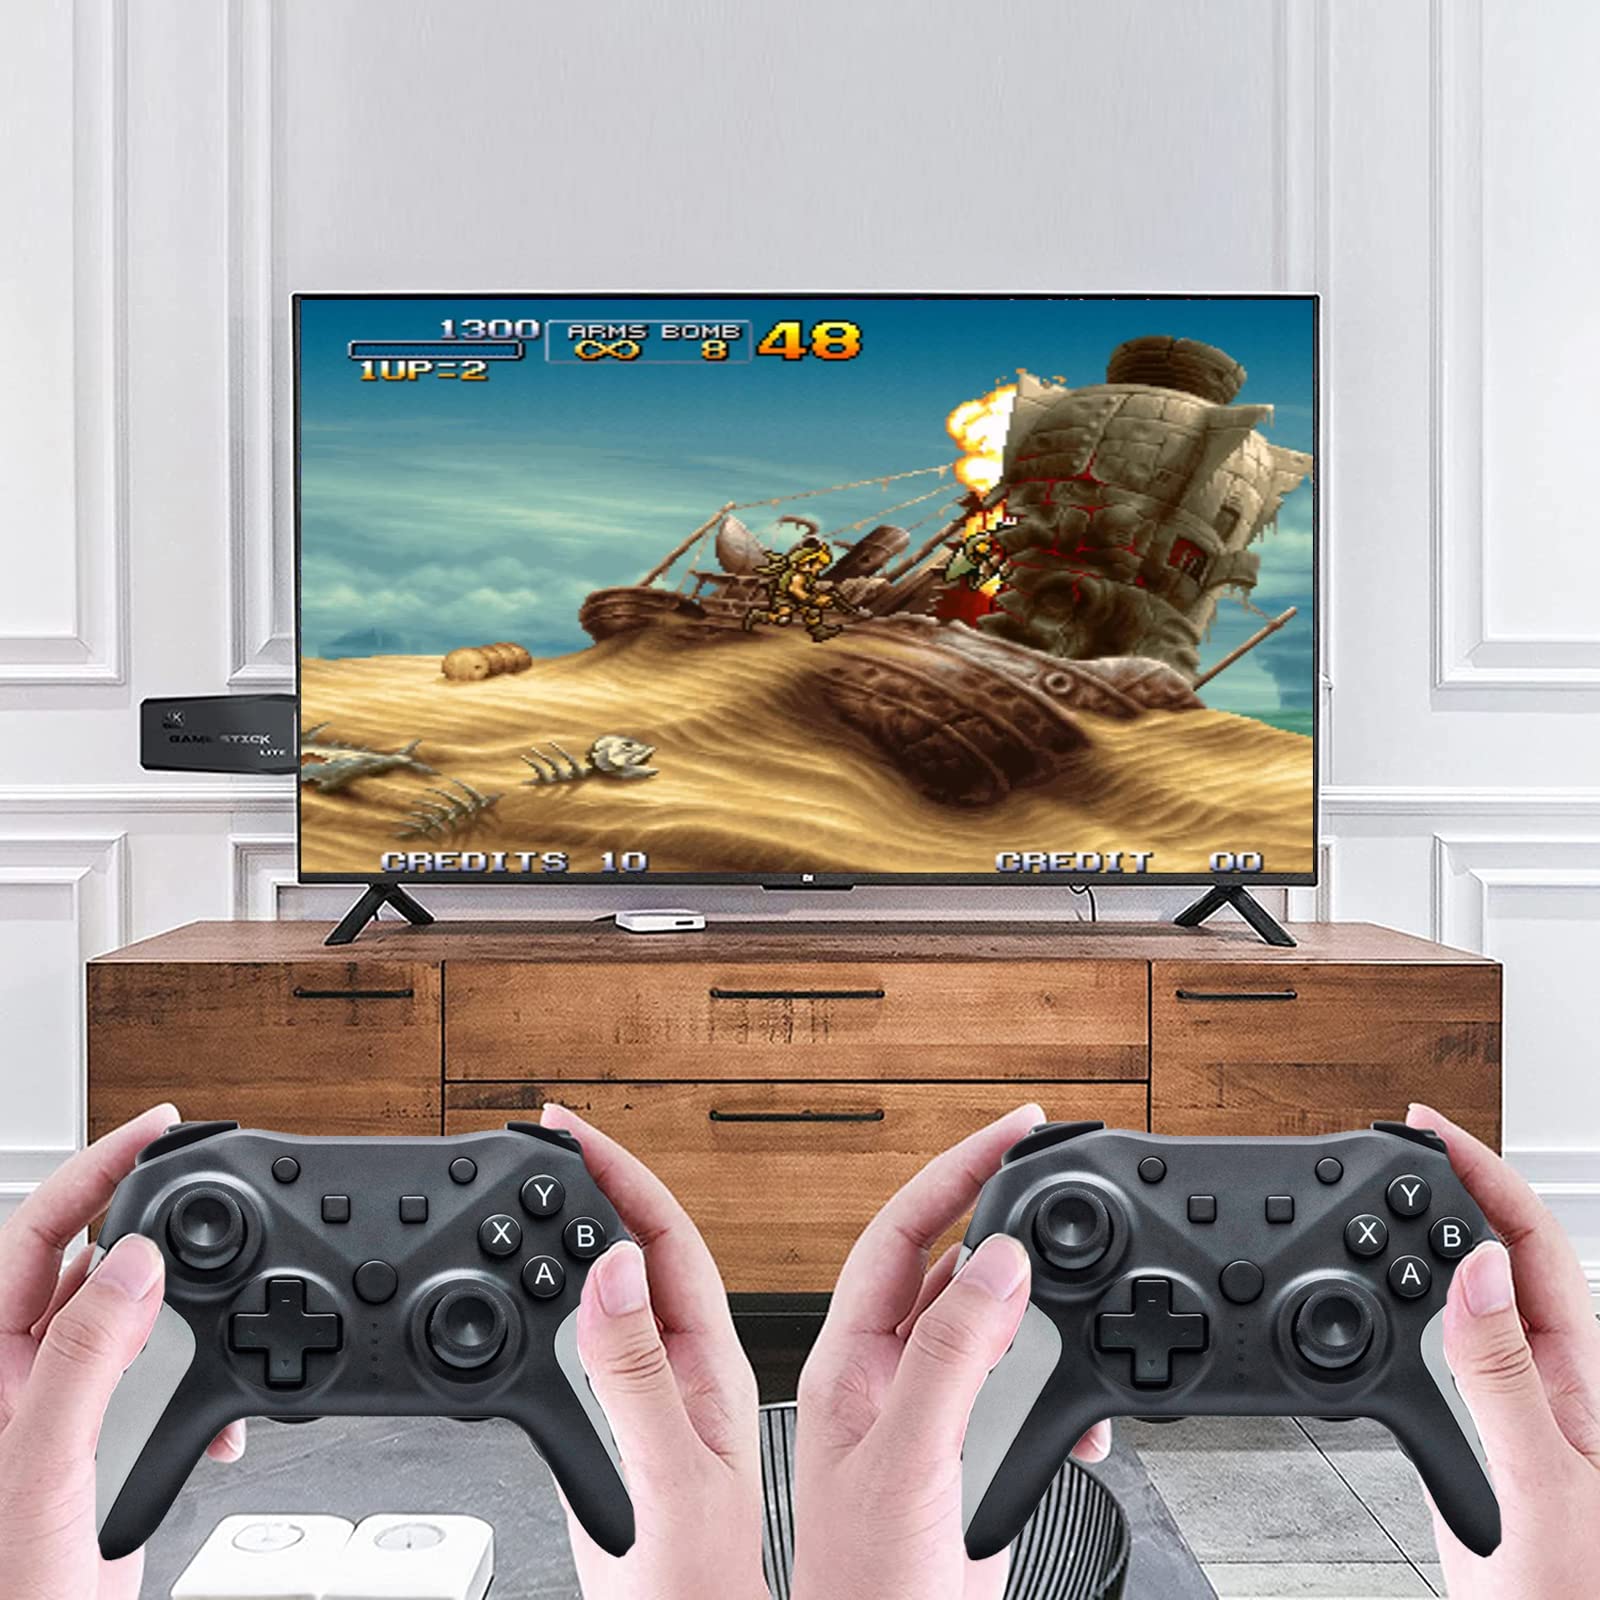 ScienSta Wireless Retro Game Console, Plug and Play Video Game Stick Built in 10000+ Games, 4K High Definition HDMI Output for TV with Dual 2.4G Wireless Controllers,9 Classic Emulators